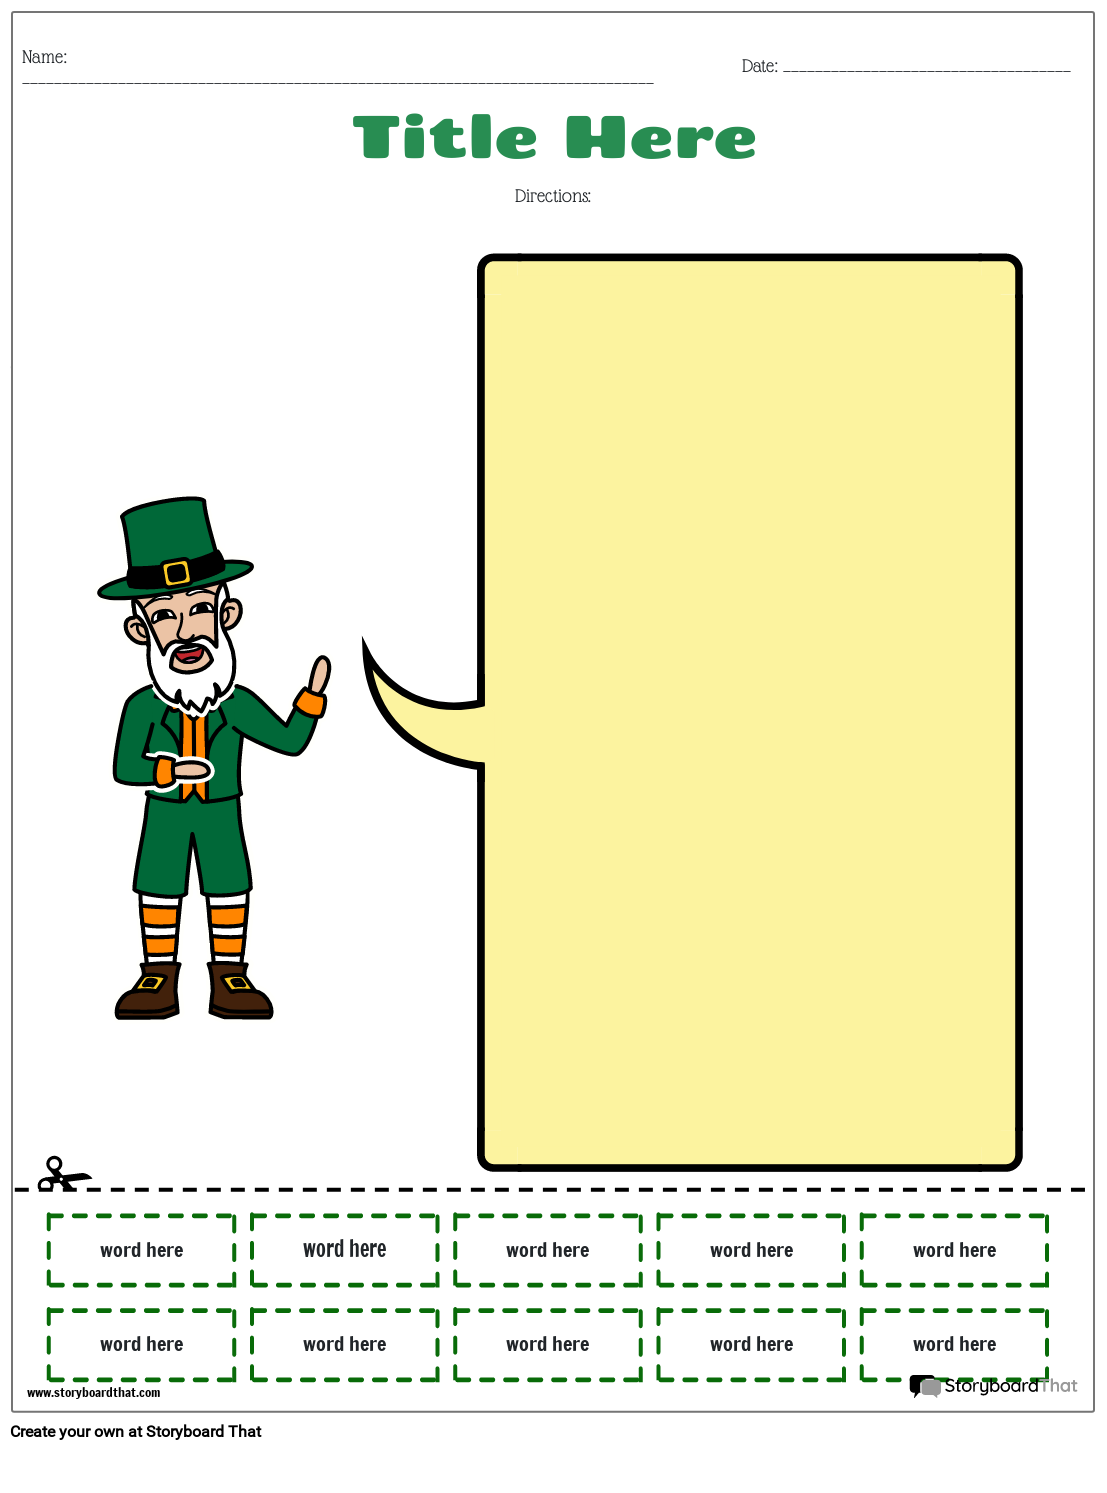 ABC Order Cut Out St. Patrick's Template